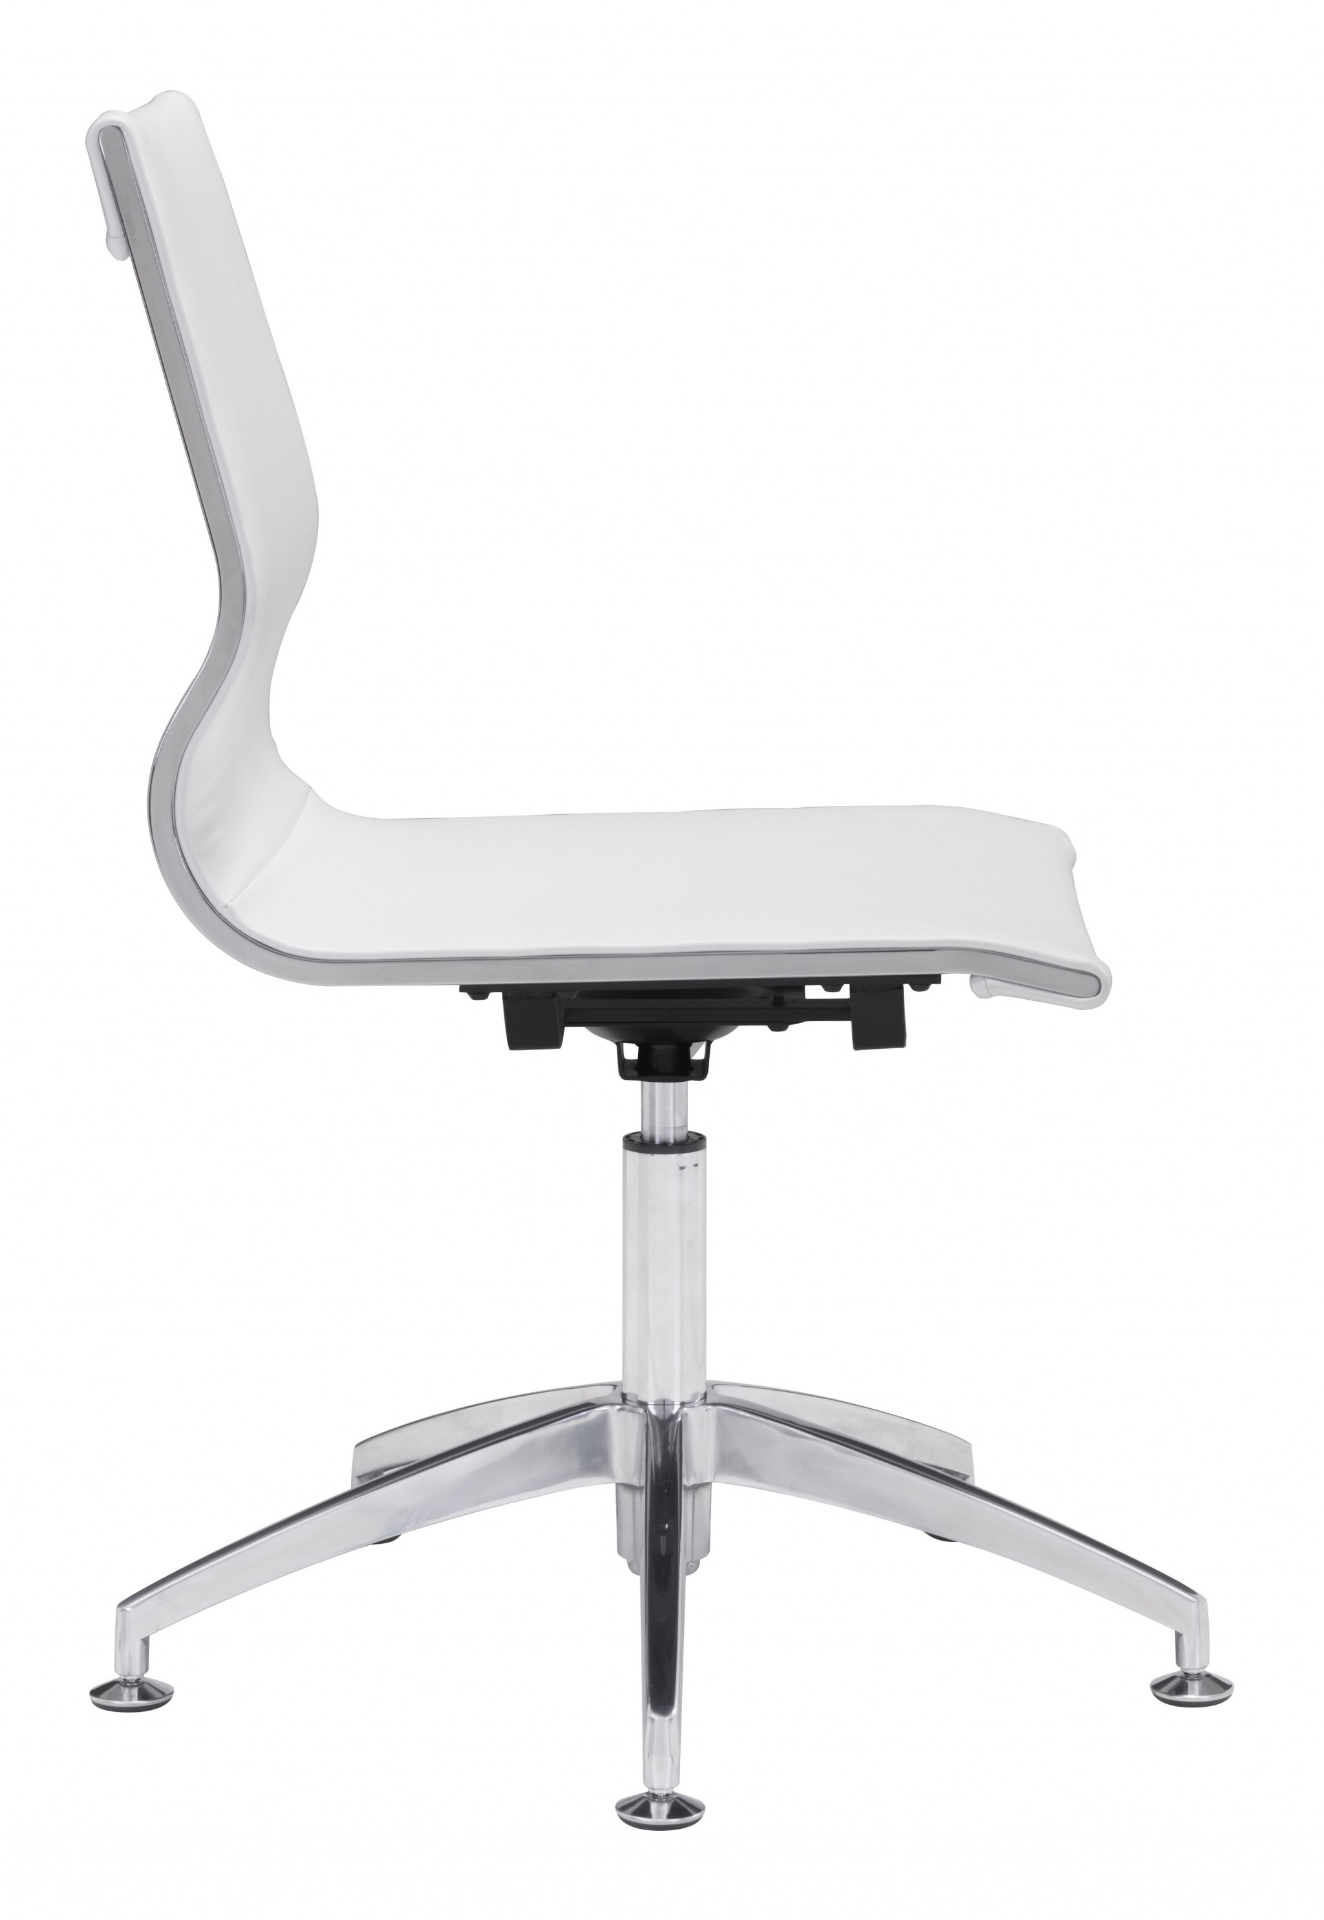 Ergonomic Conference Room Office Chair - White